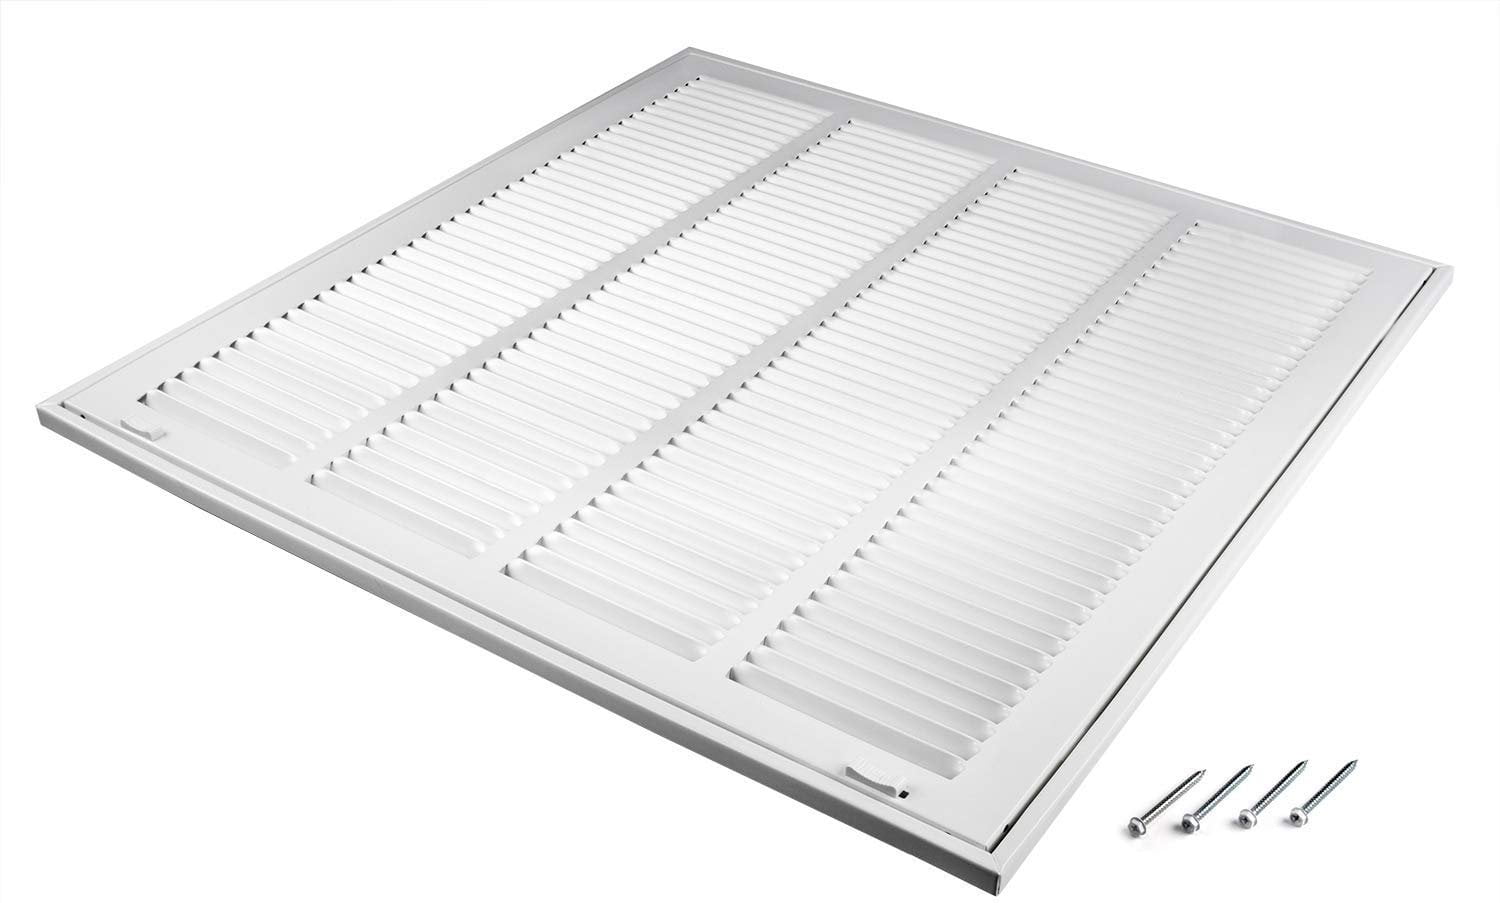 Accord ABRFWH2020 Return Filter Grille with 1/2-Inch Fin Louvered Duct Opening Measurements 20-Inch x 20-Inch White